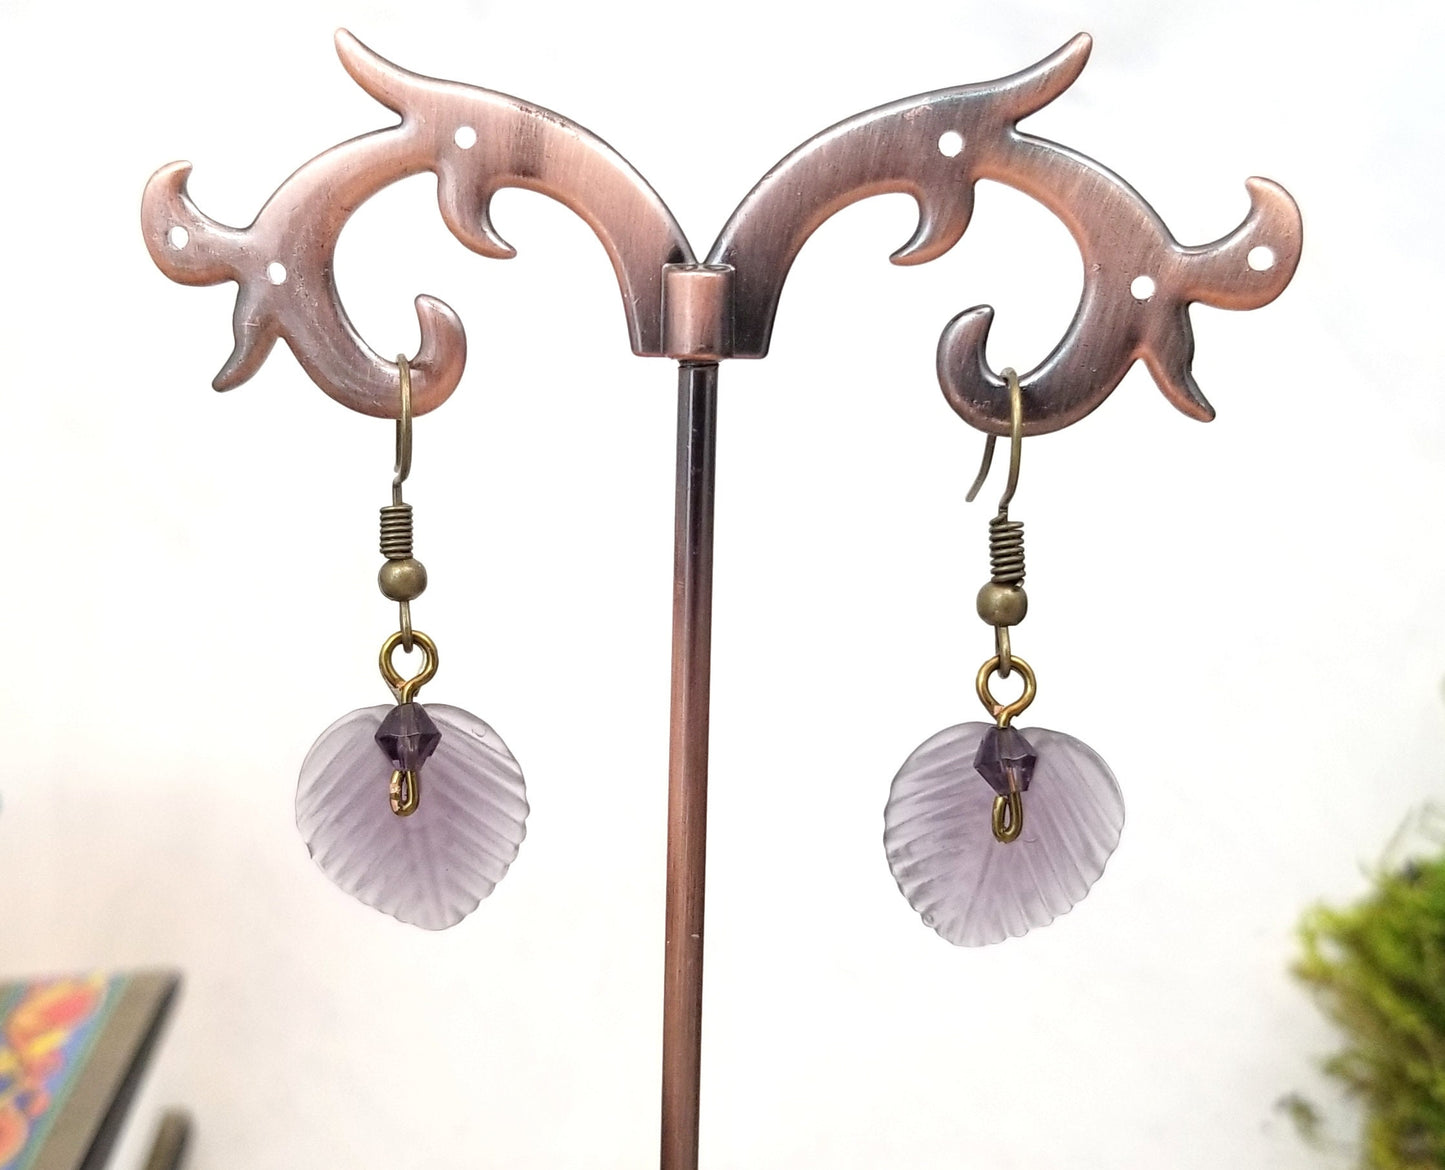 Medium Glass Leaf Earrings in Frosted Purple, Wedding, Bridesmaid, Art Nouveau, Renaissance, Belle Epoque, Forest, Choice of Closure Types